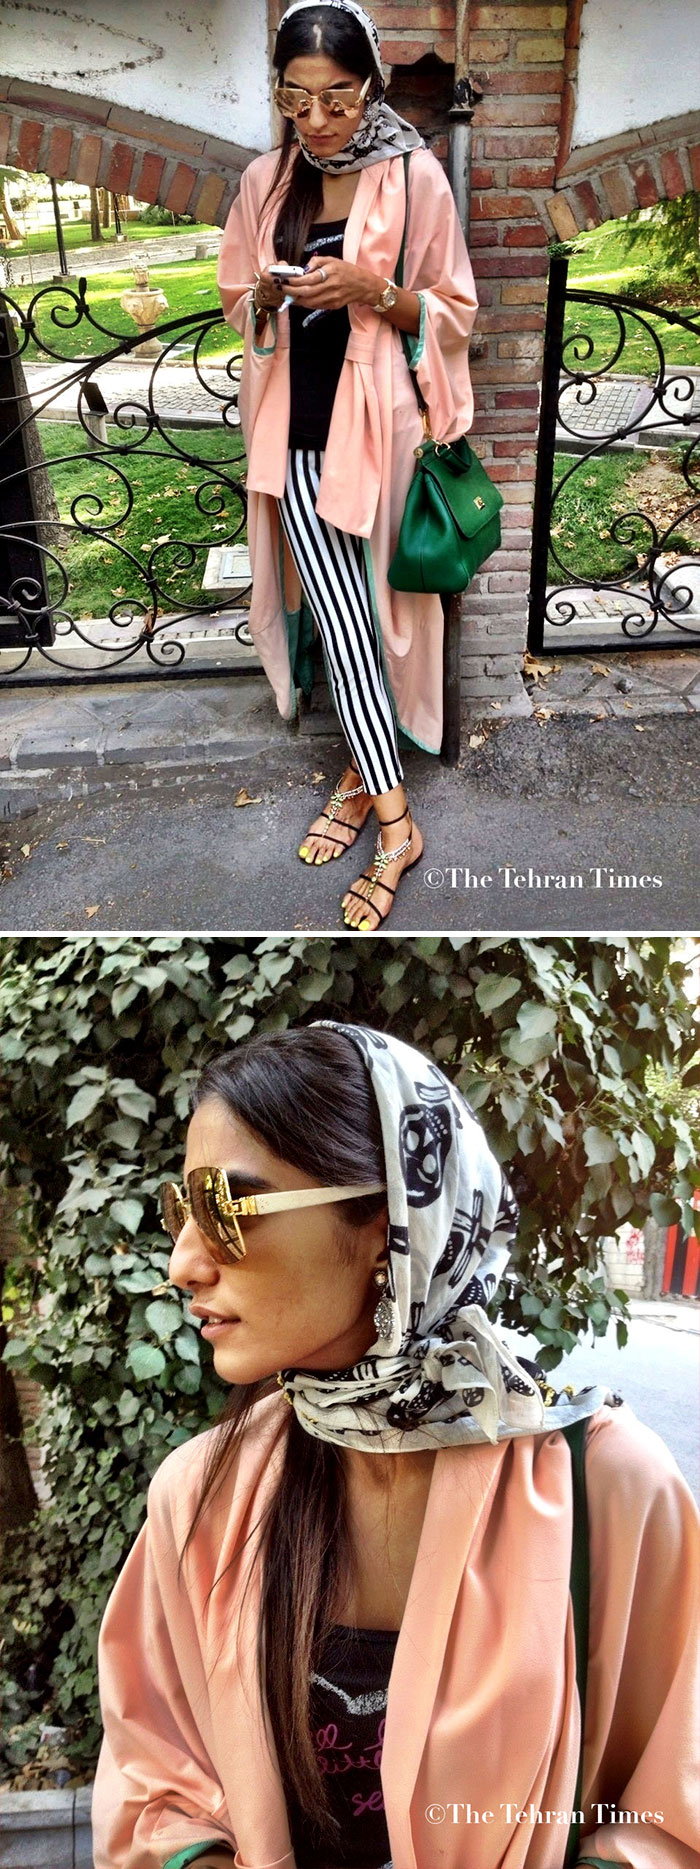 Iranian women - middle eastern street style - M Mor The thesis Timer